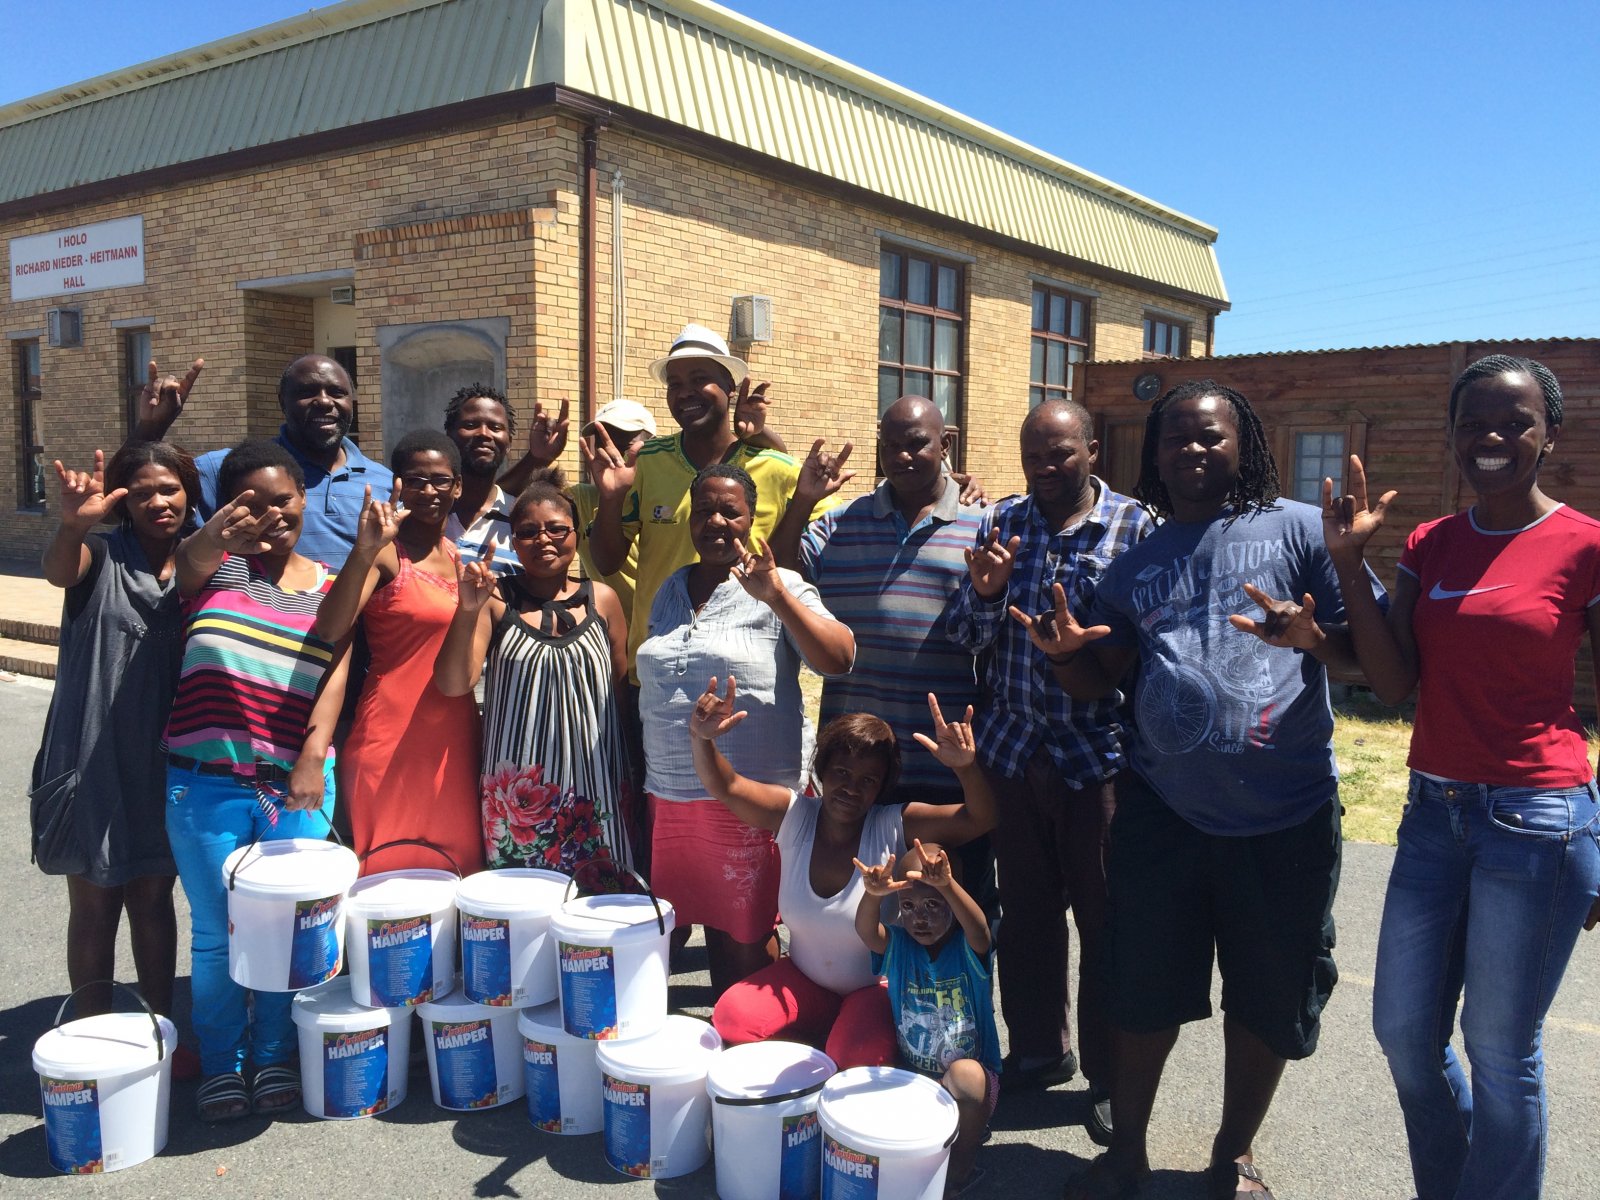 100 families benefited from the food hampers, which were donated to TMFSA by Shoprite South Africa. Touching lives of the ordinary people!